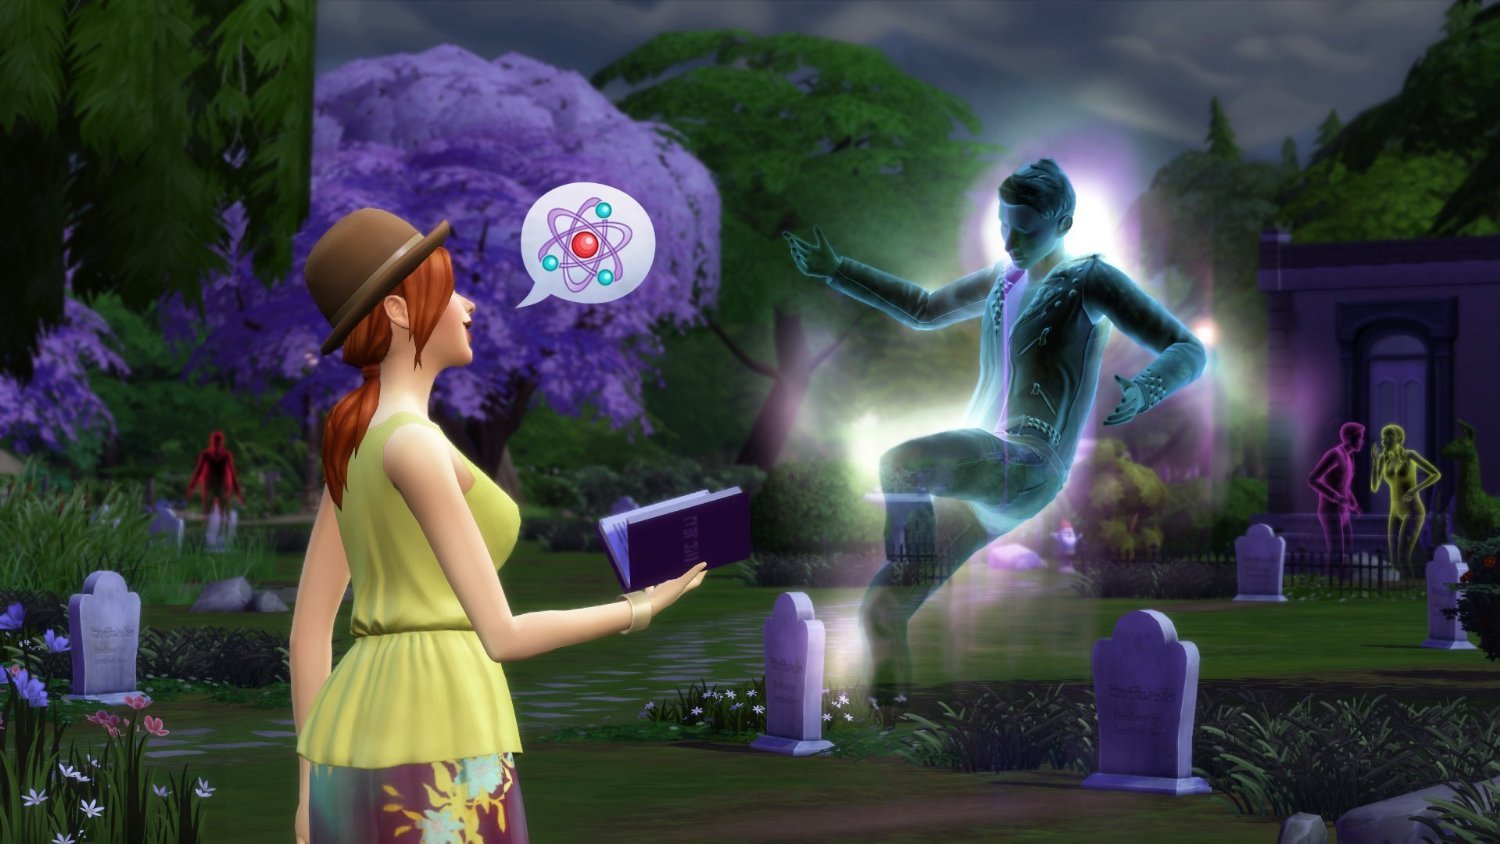 free download of the sims 4 windows 10 full game using mega